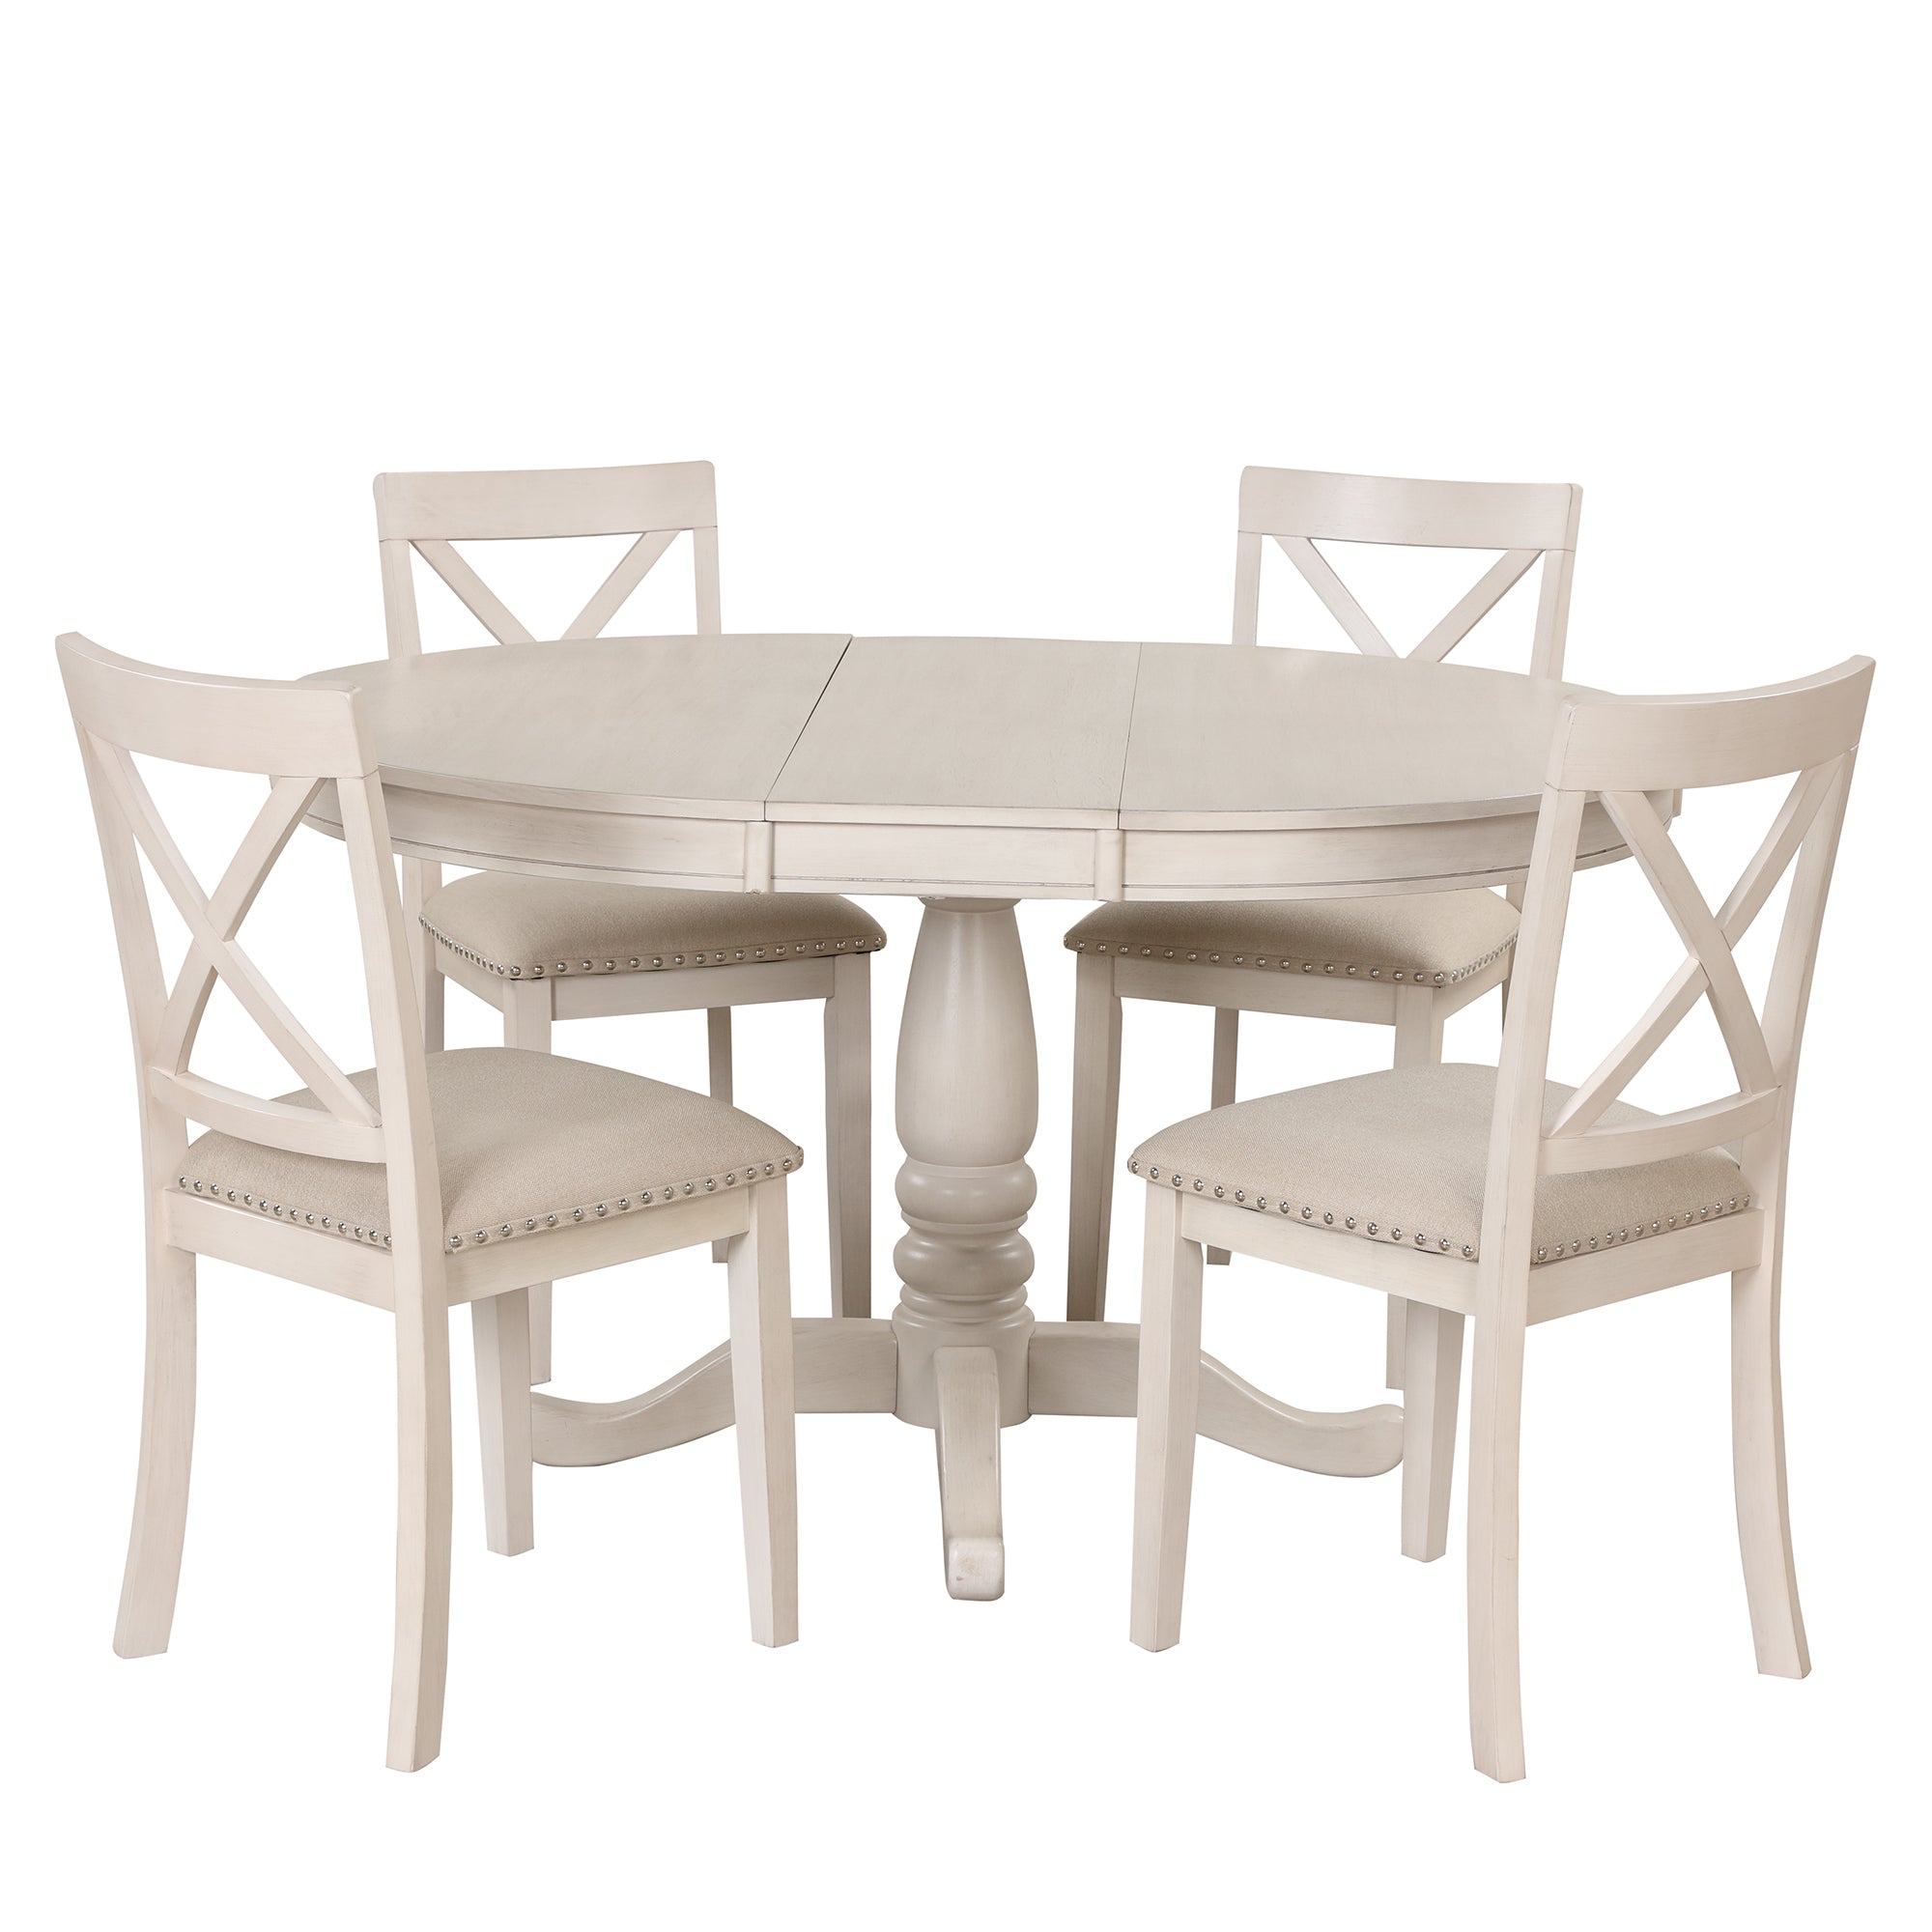 Round Table 4 Chairs